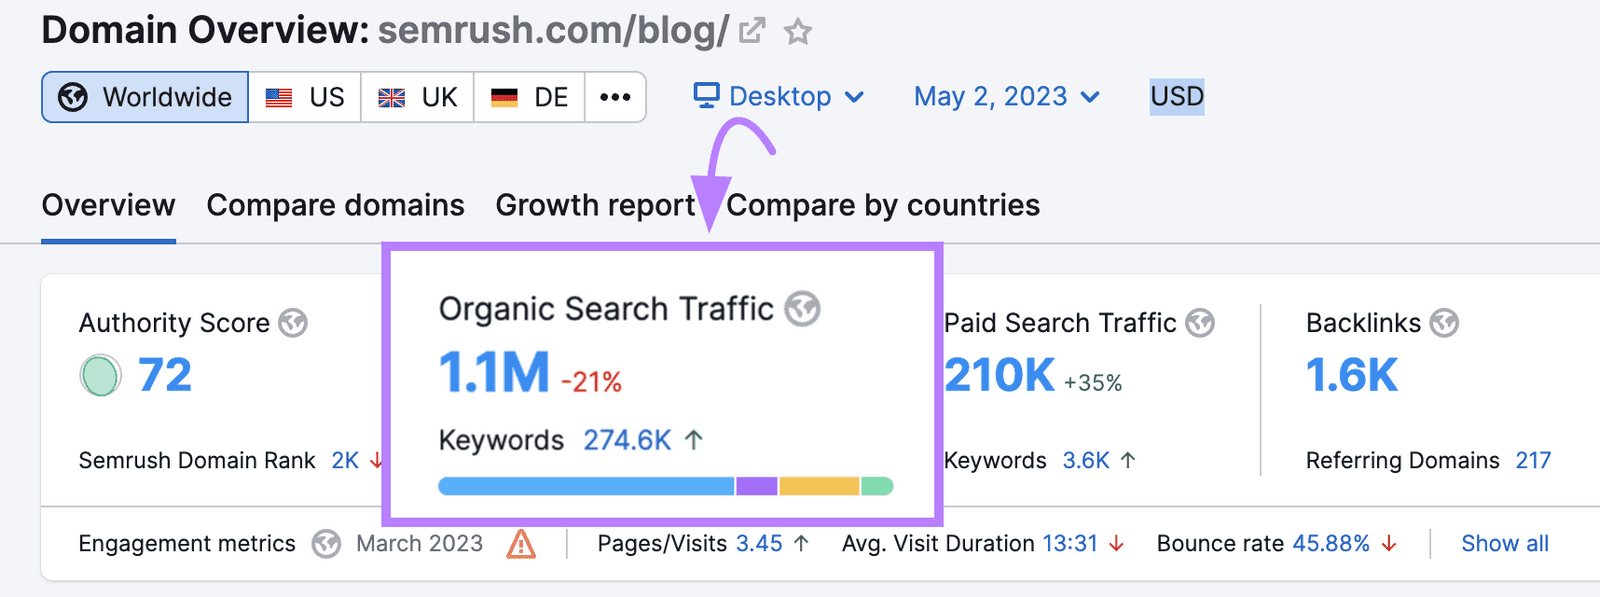 Organic search traffic metric in Domain Overview tool shows 1.1M for Semrush Blog